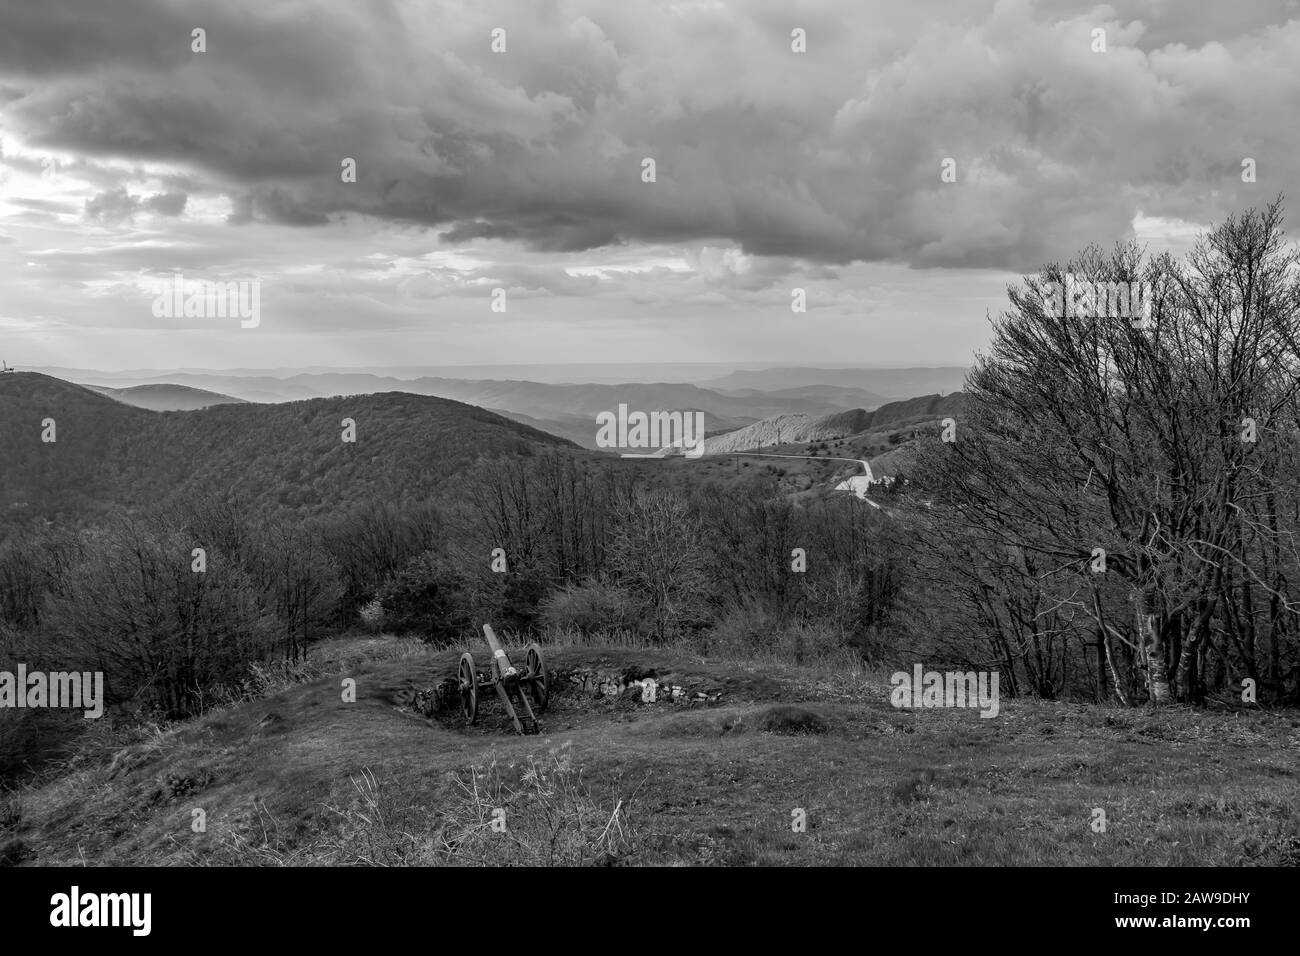 Dramatic autumn black and white view over the mountain range from near Shipka peak, Stara Planina mountain in Central Bulgaria as seen from Shipka Memorial. Moody feeling. Old Russian cannon Stock Photo